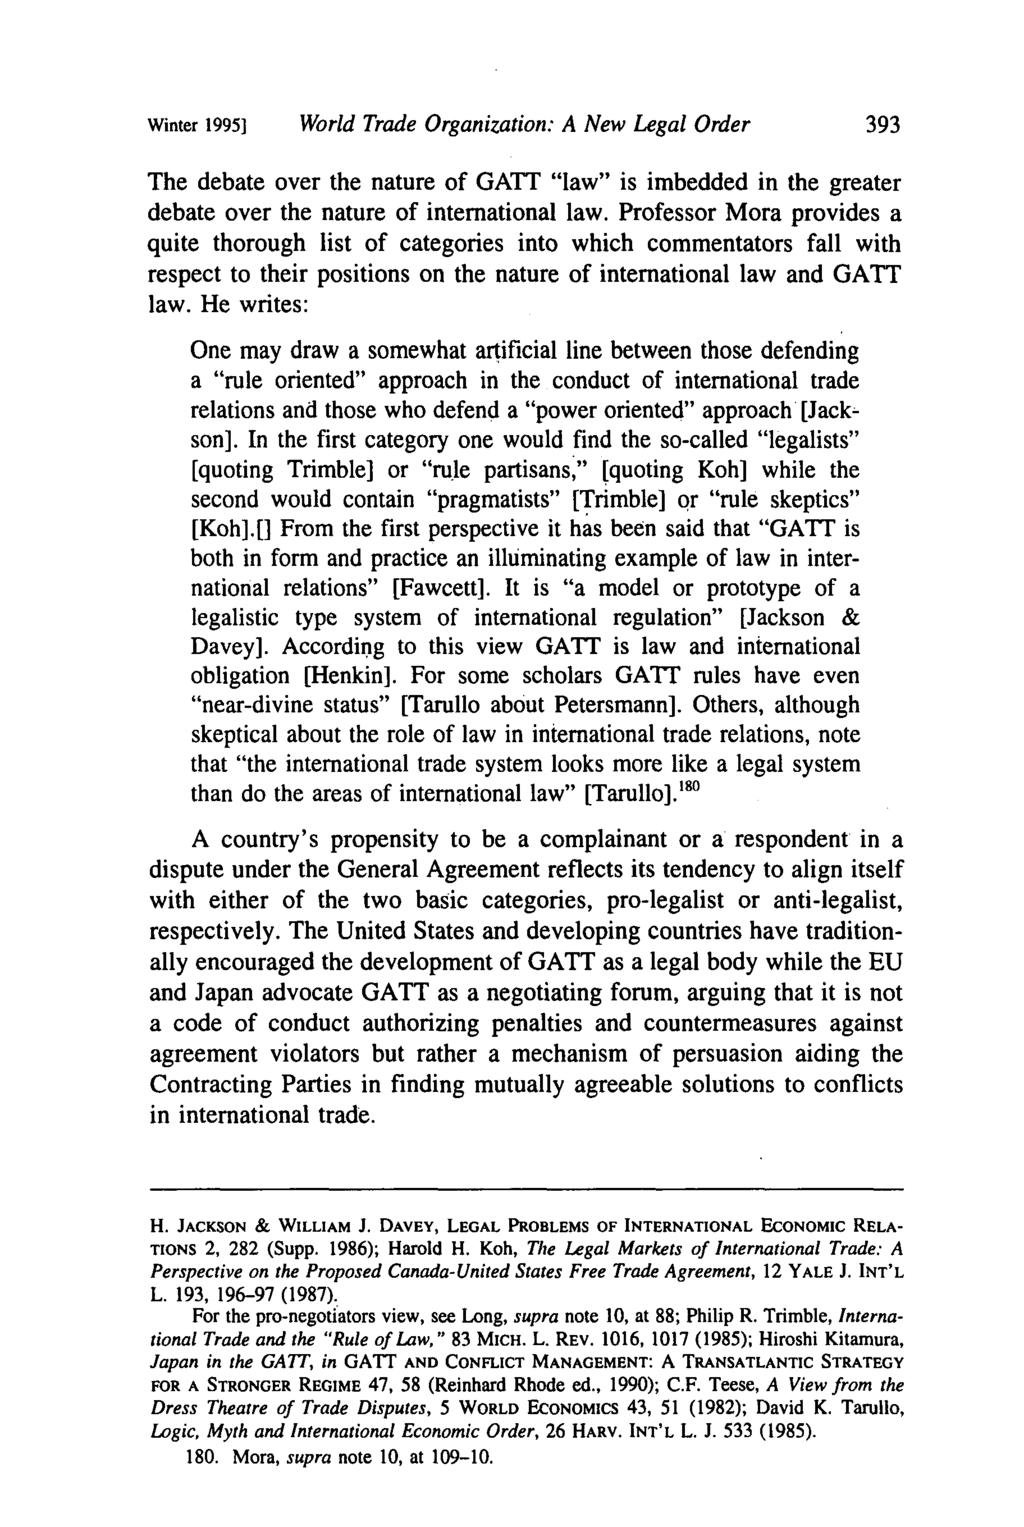 Winter 1995] World Trade Organization: A New Legal Order The debate over the nature of GATT "law" is imbedded in the greater debate over the nature of international law.